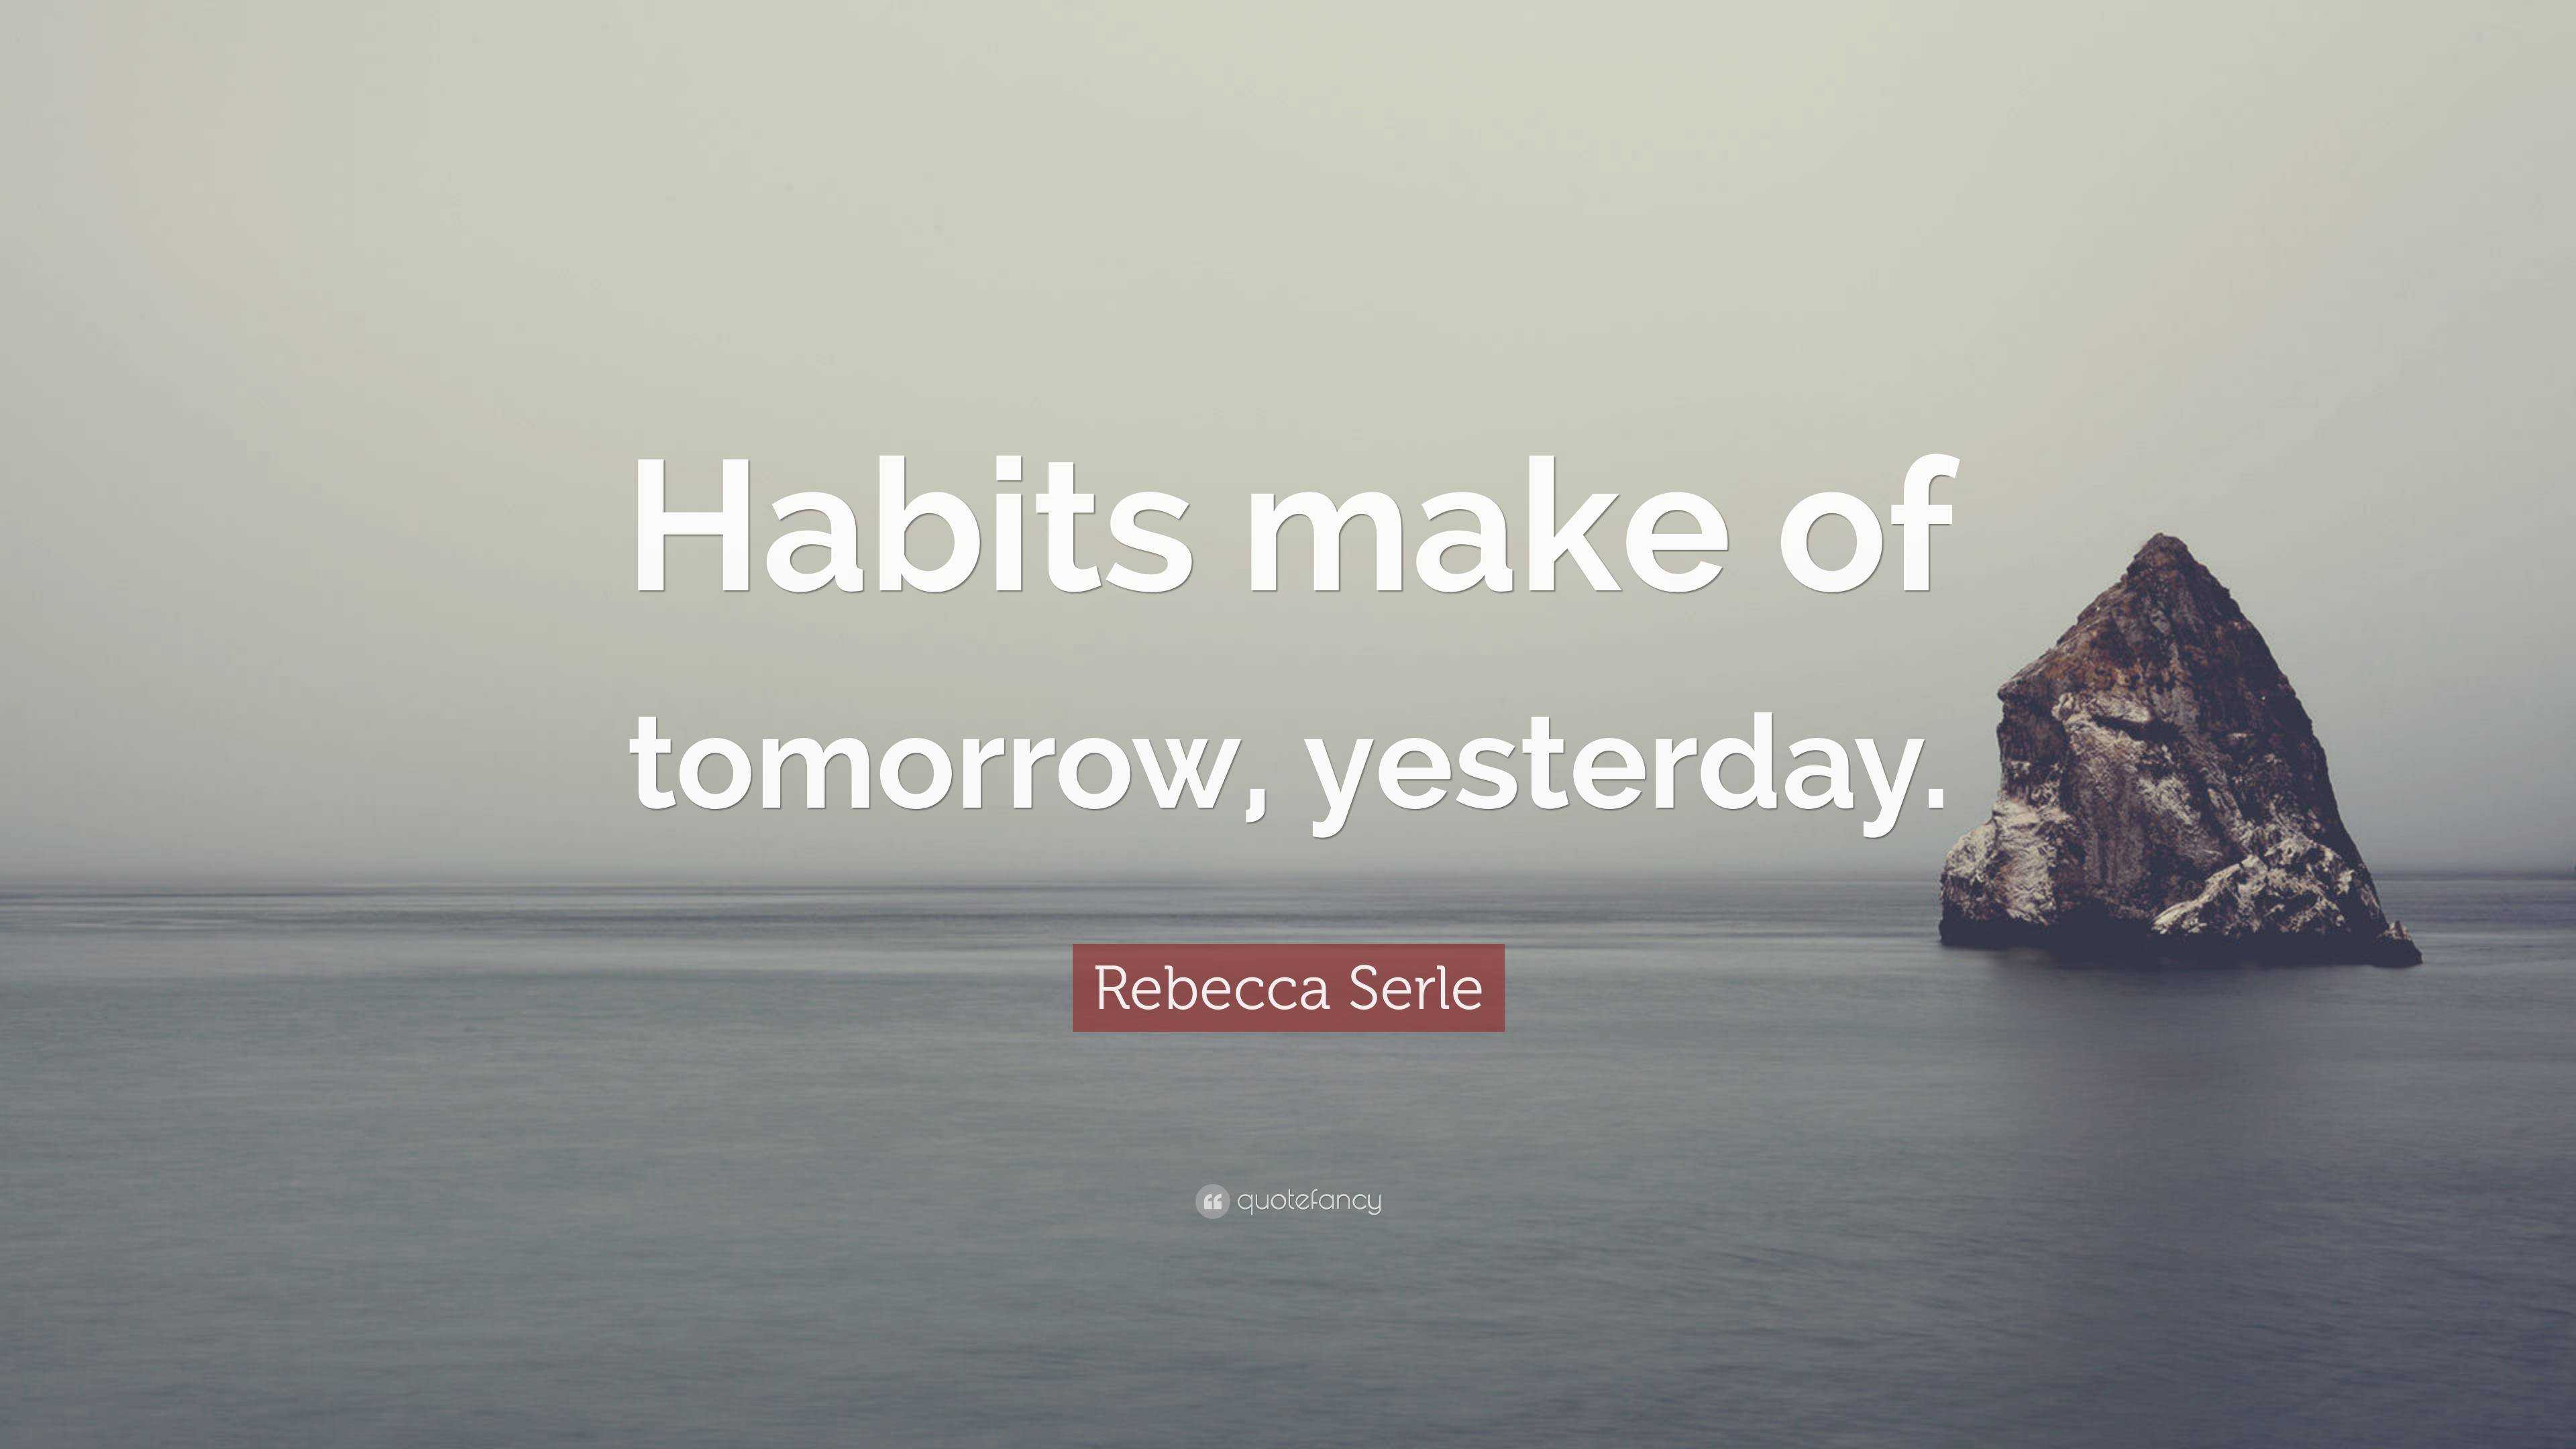 Rebecca Serle Quote: “Habits make of tomorrow, yesterday.”